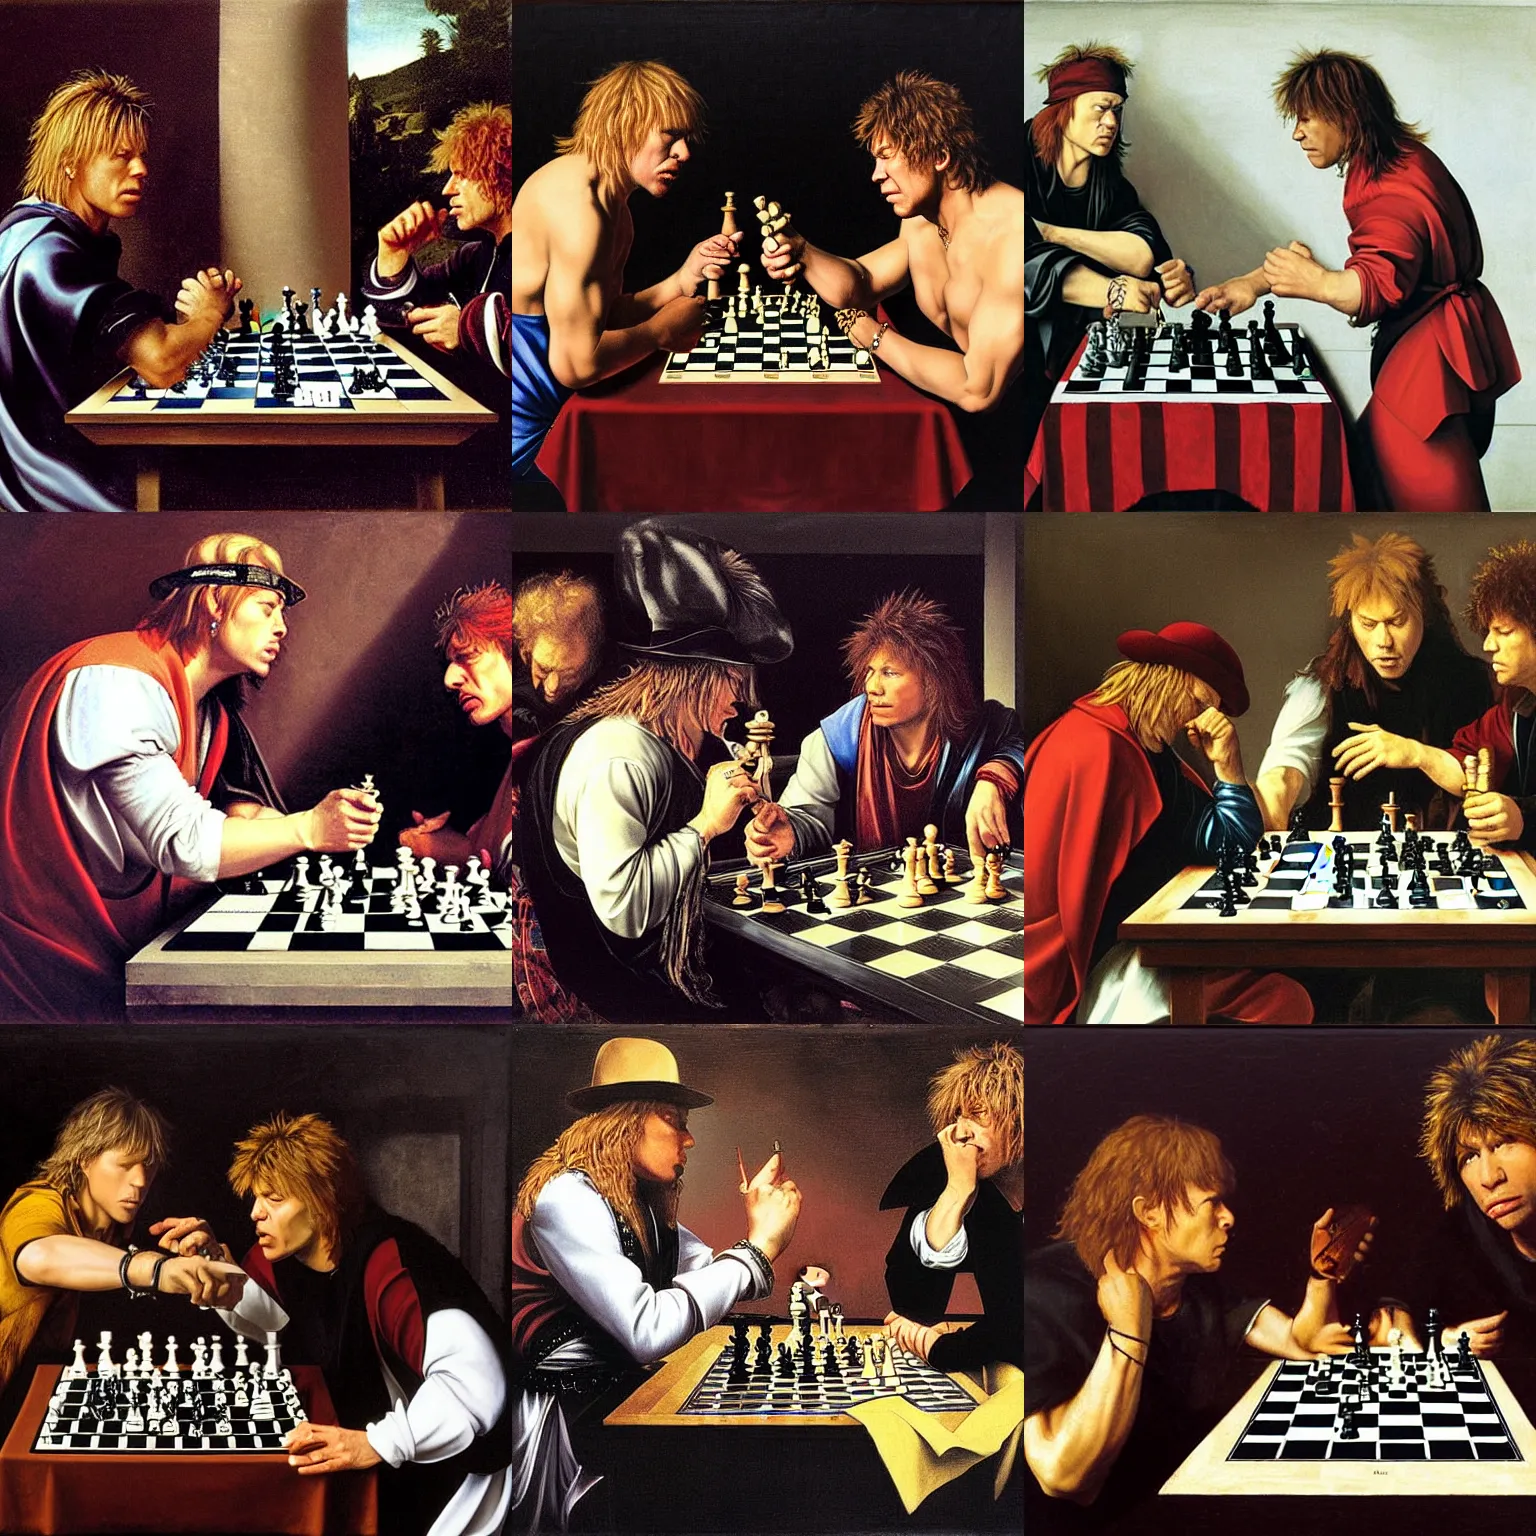 Prompt: axl rose and john bon jovi playing chess, by caravaggio